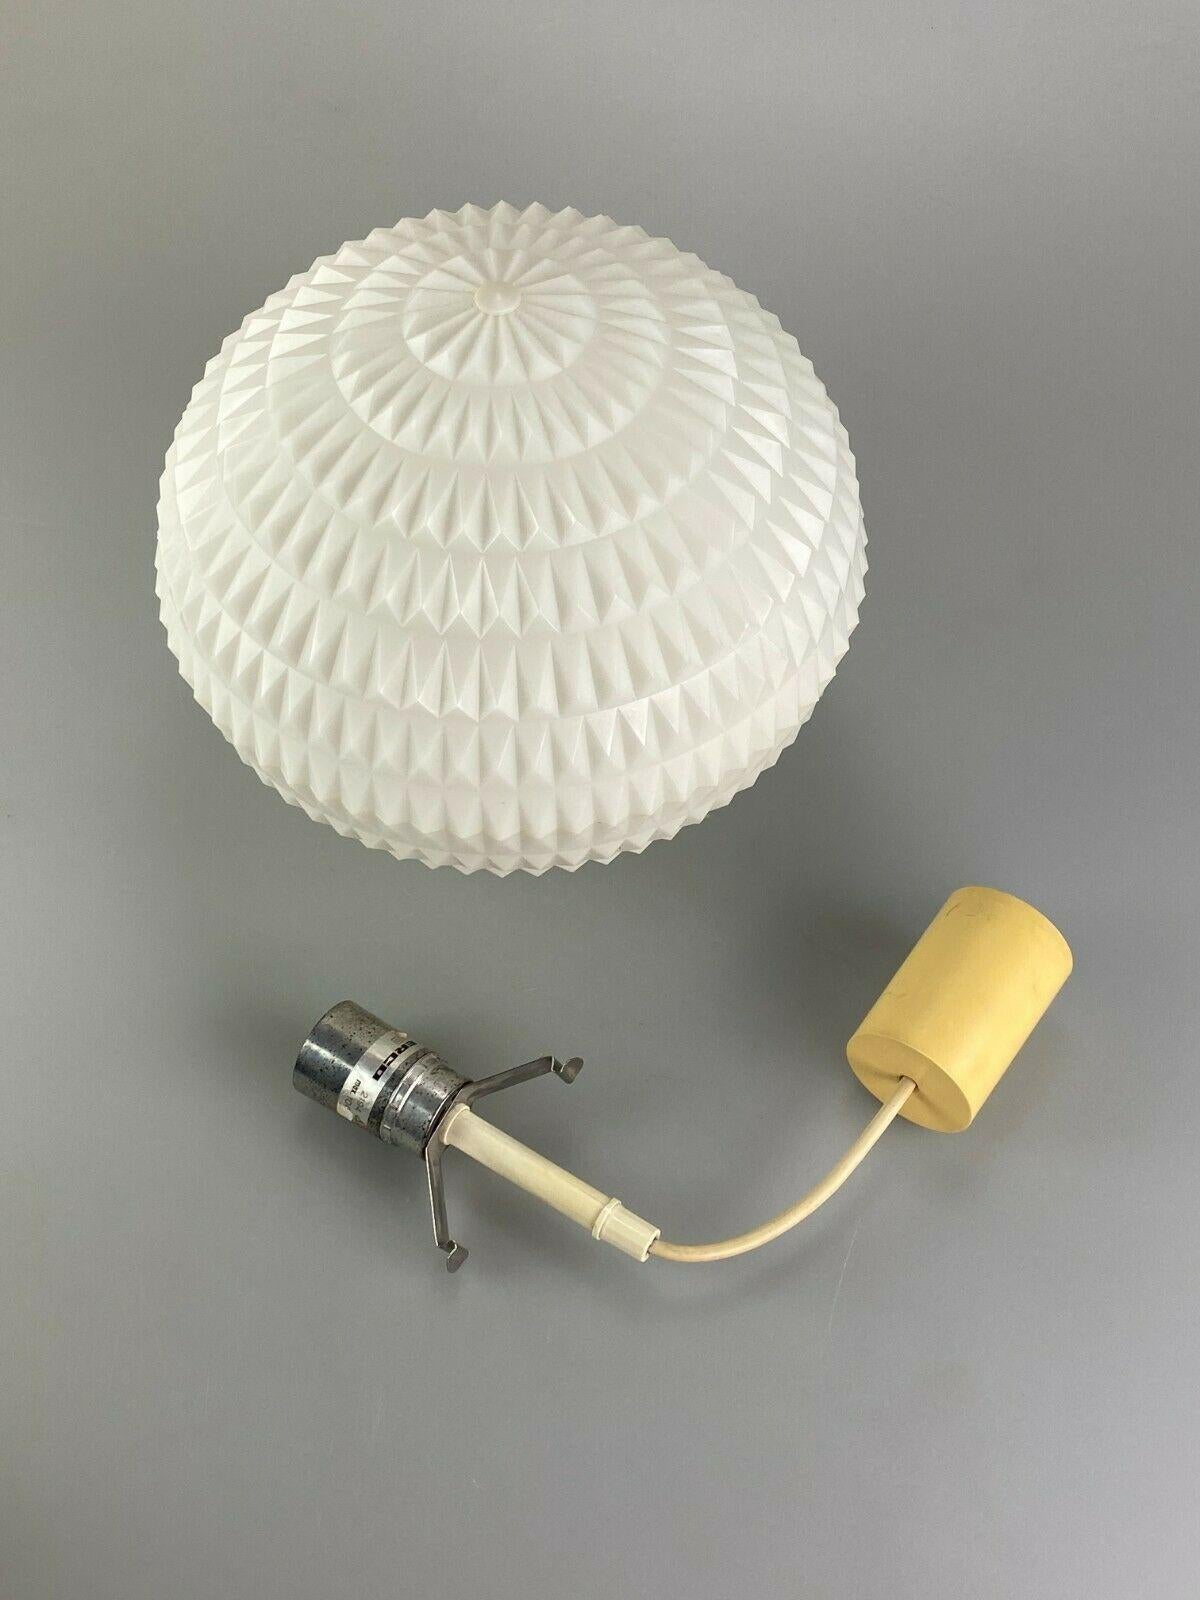 60s 70s Erco Lamp Light Honeycomb Ceiling Lamp Plastic Space Age Design For Sale 3